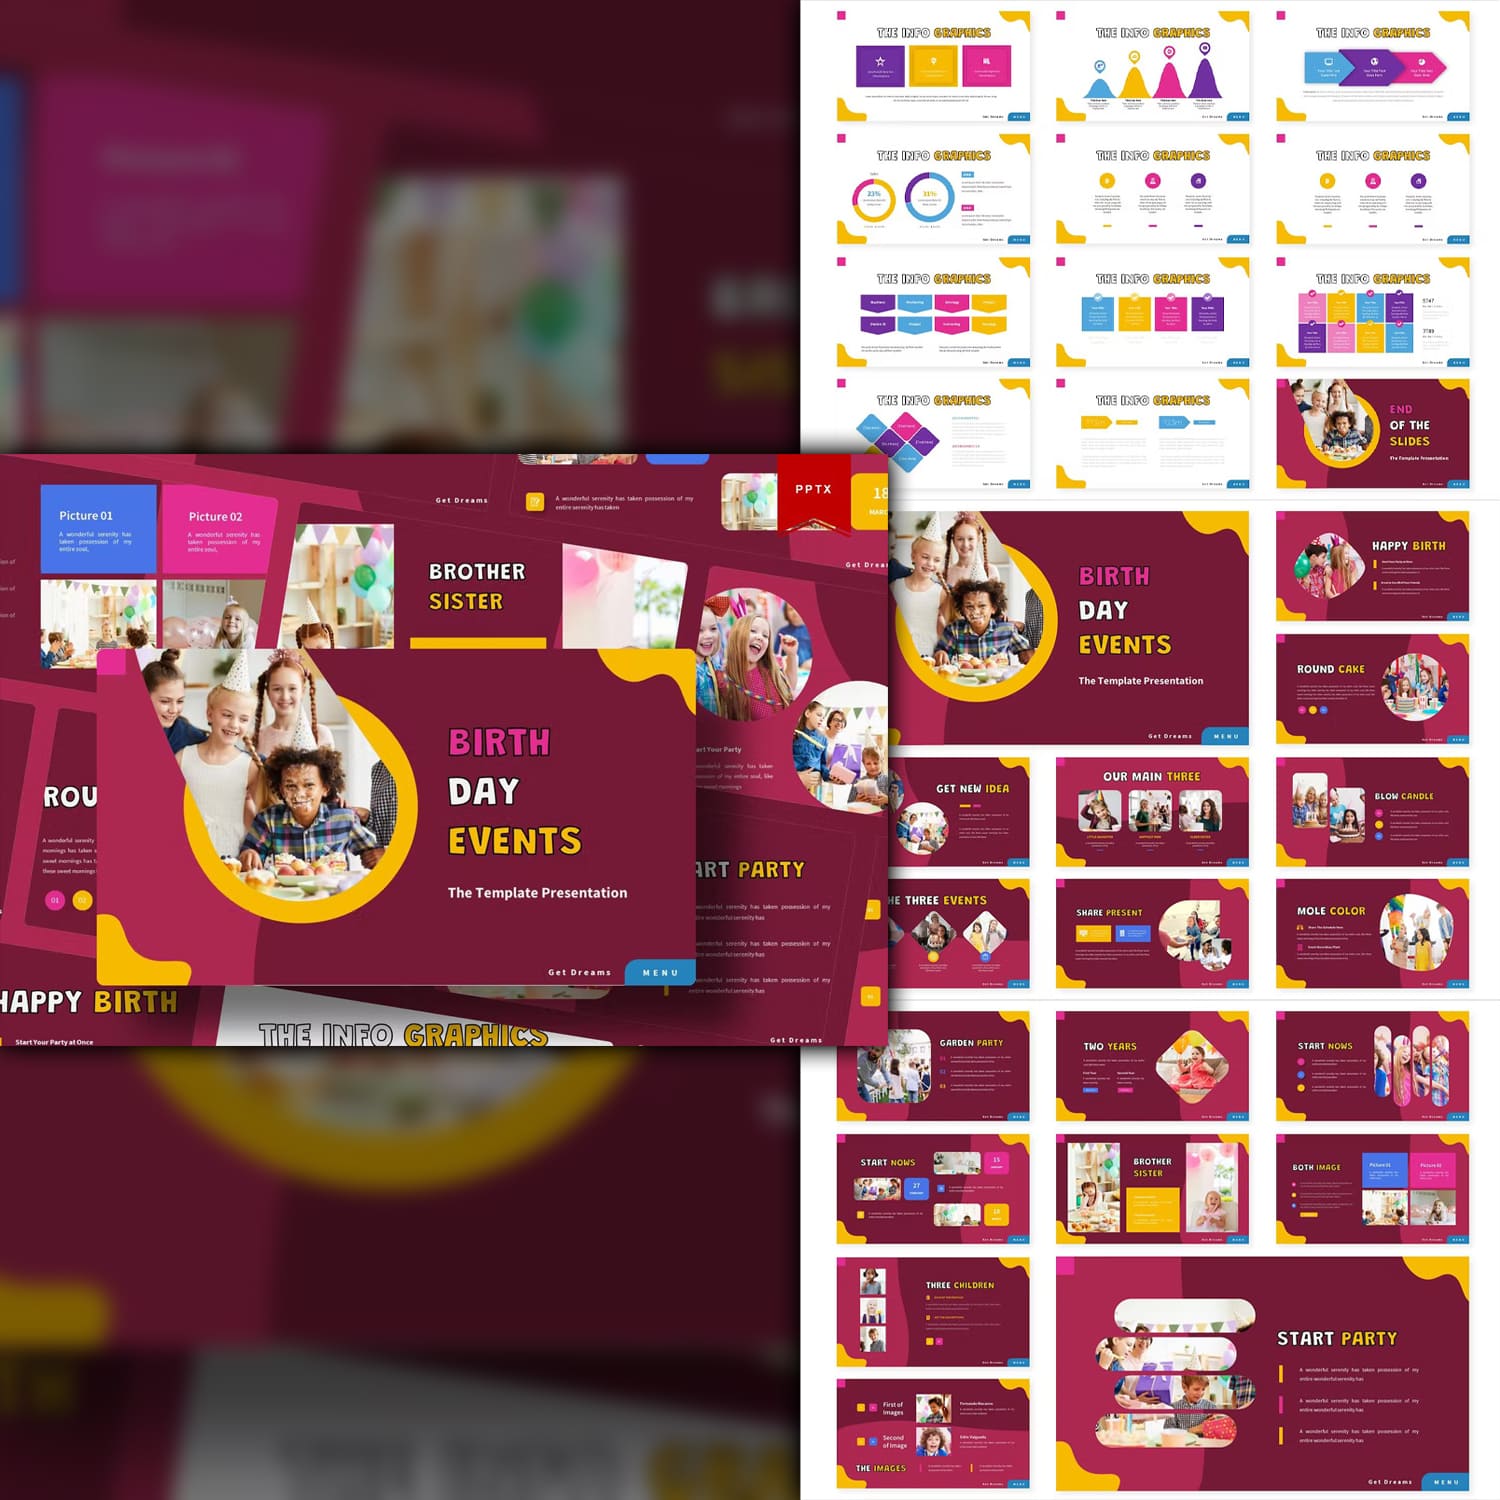 Birth day events powerpoint template from Vunira.